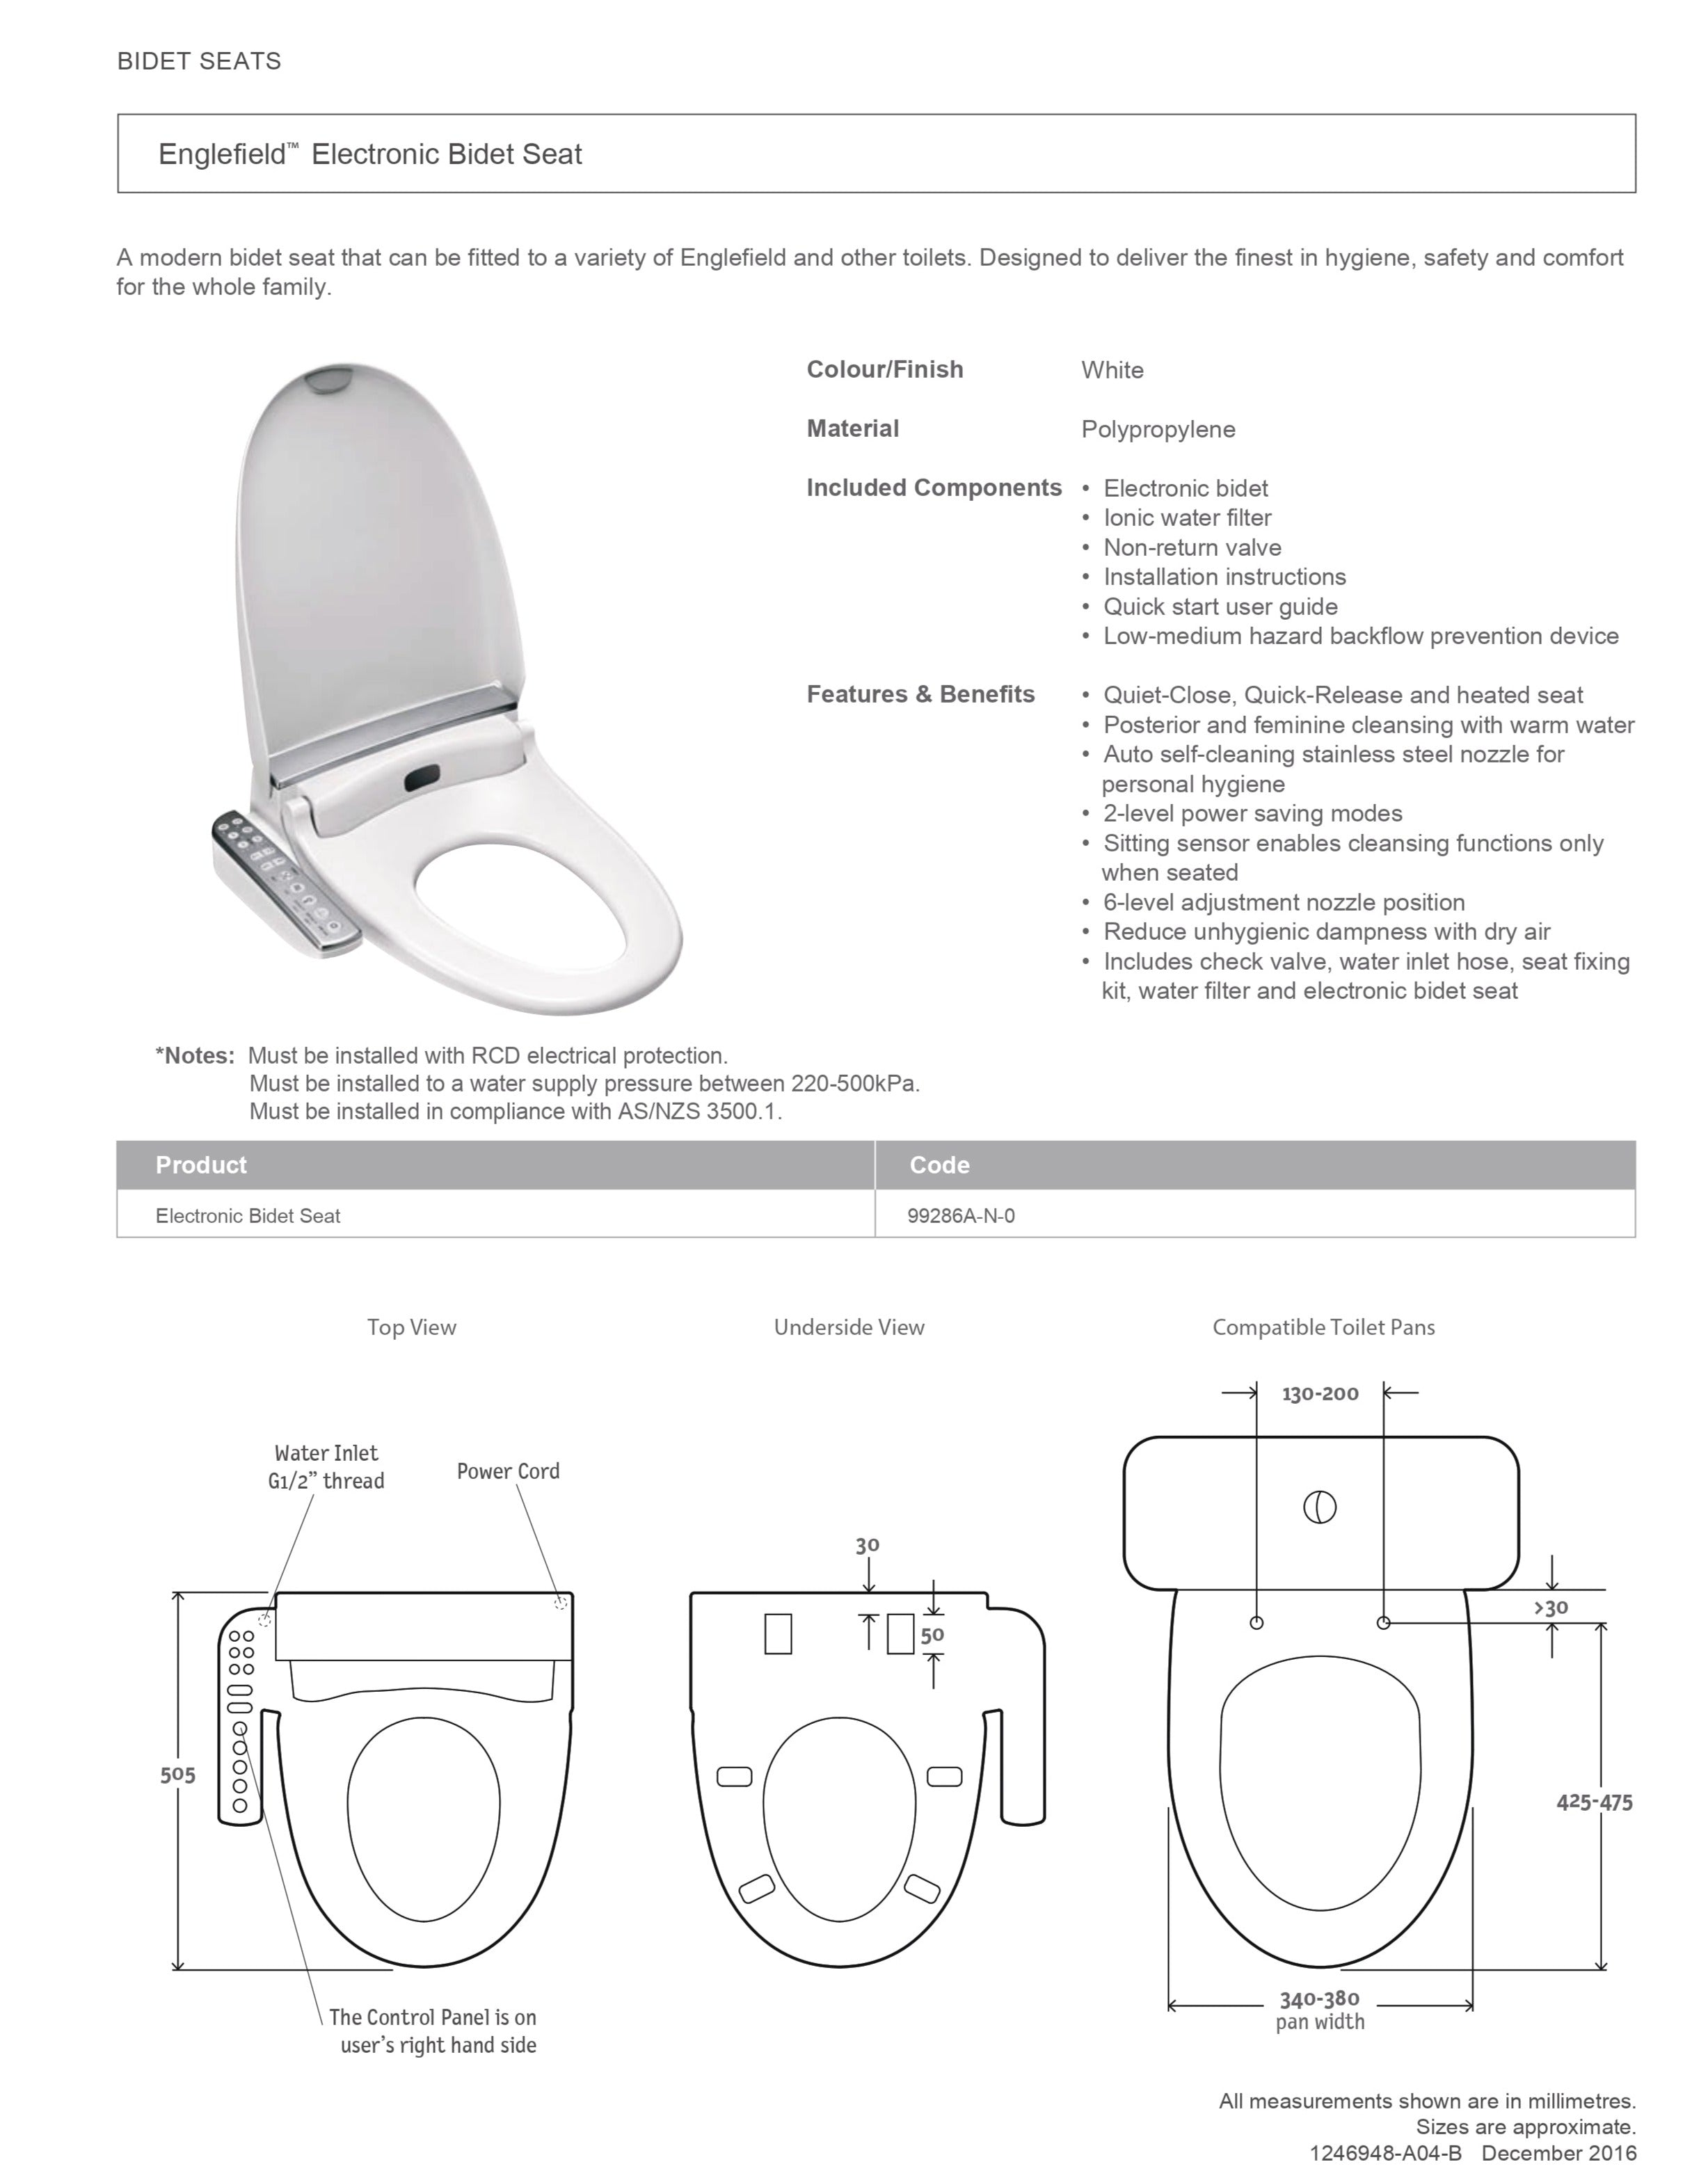 ENGLEFIELD BY KOHLER ELECTRONIC BIDET SEAT WITH SIDE CONTROL GLOSS WHITE ELONGATED